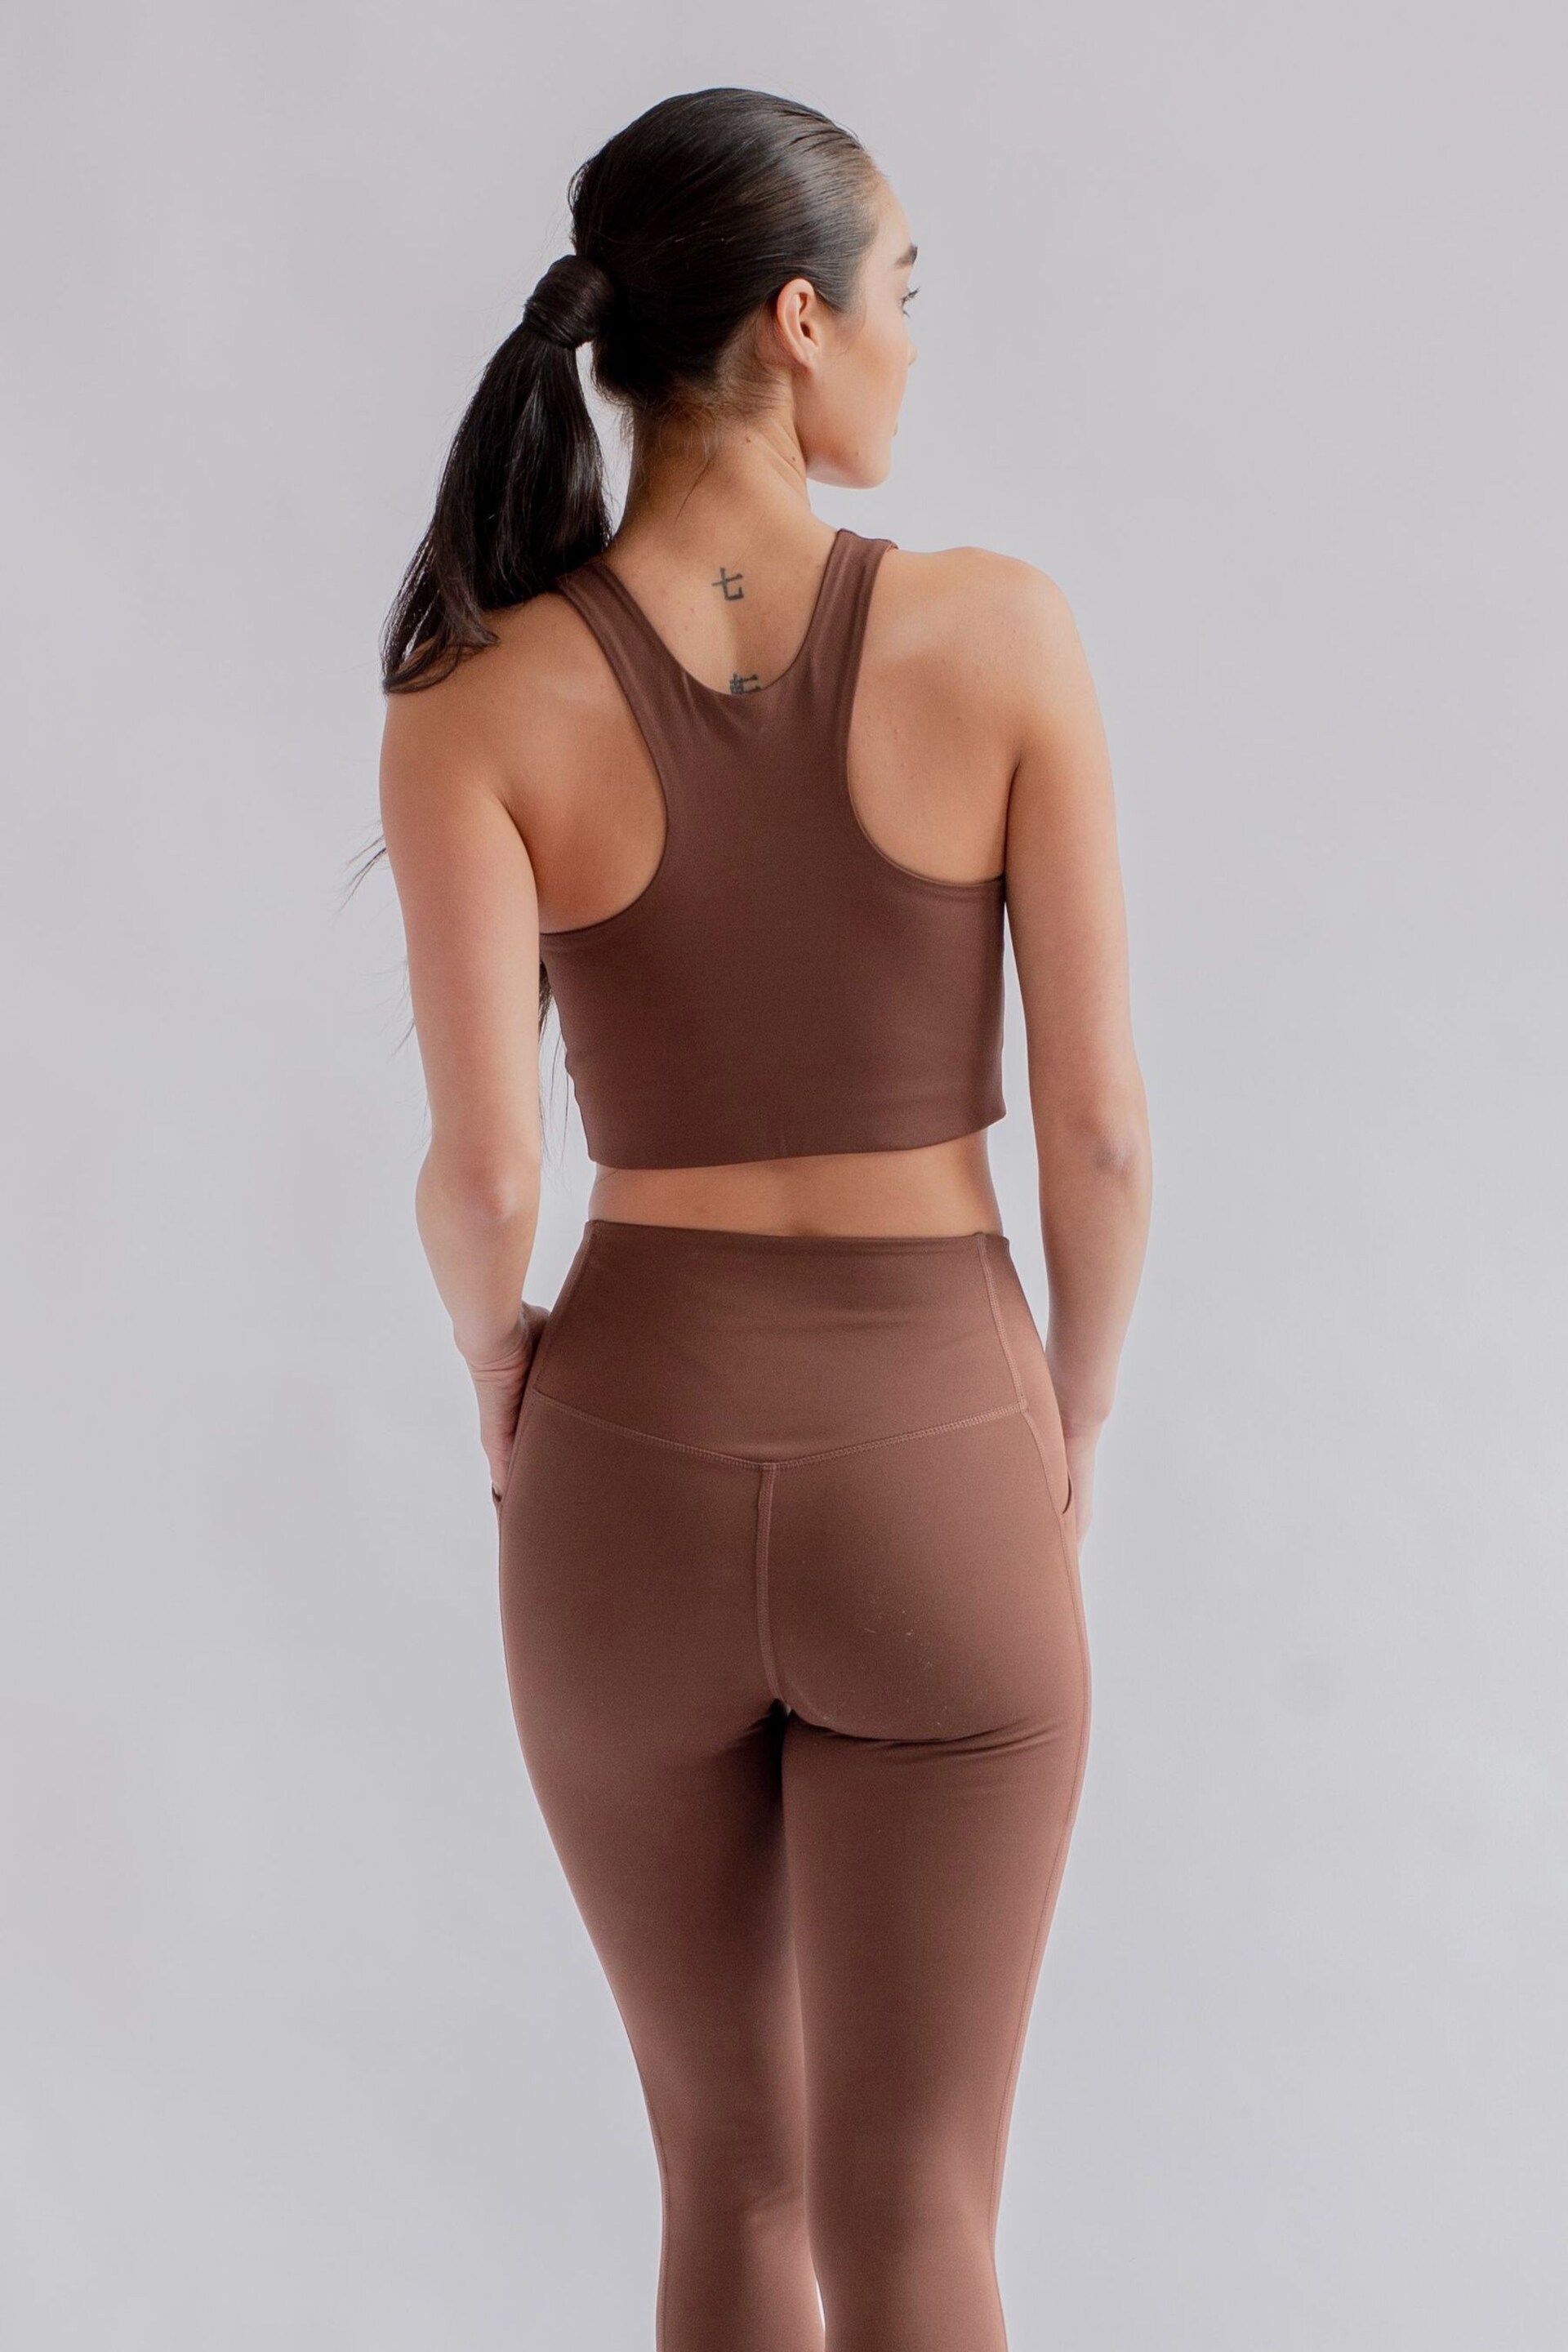 Girlfriend Collective High Rise Pocket Leggings - Image 2 of 7